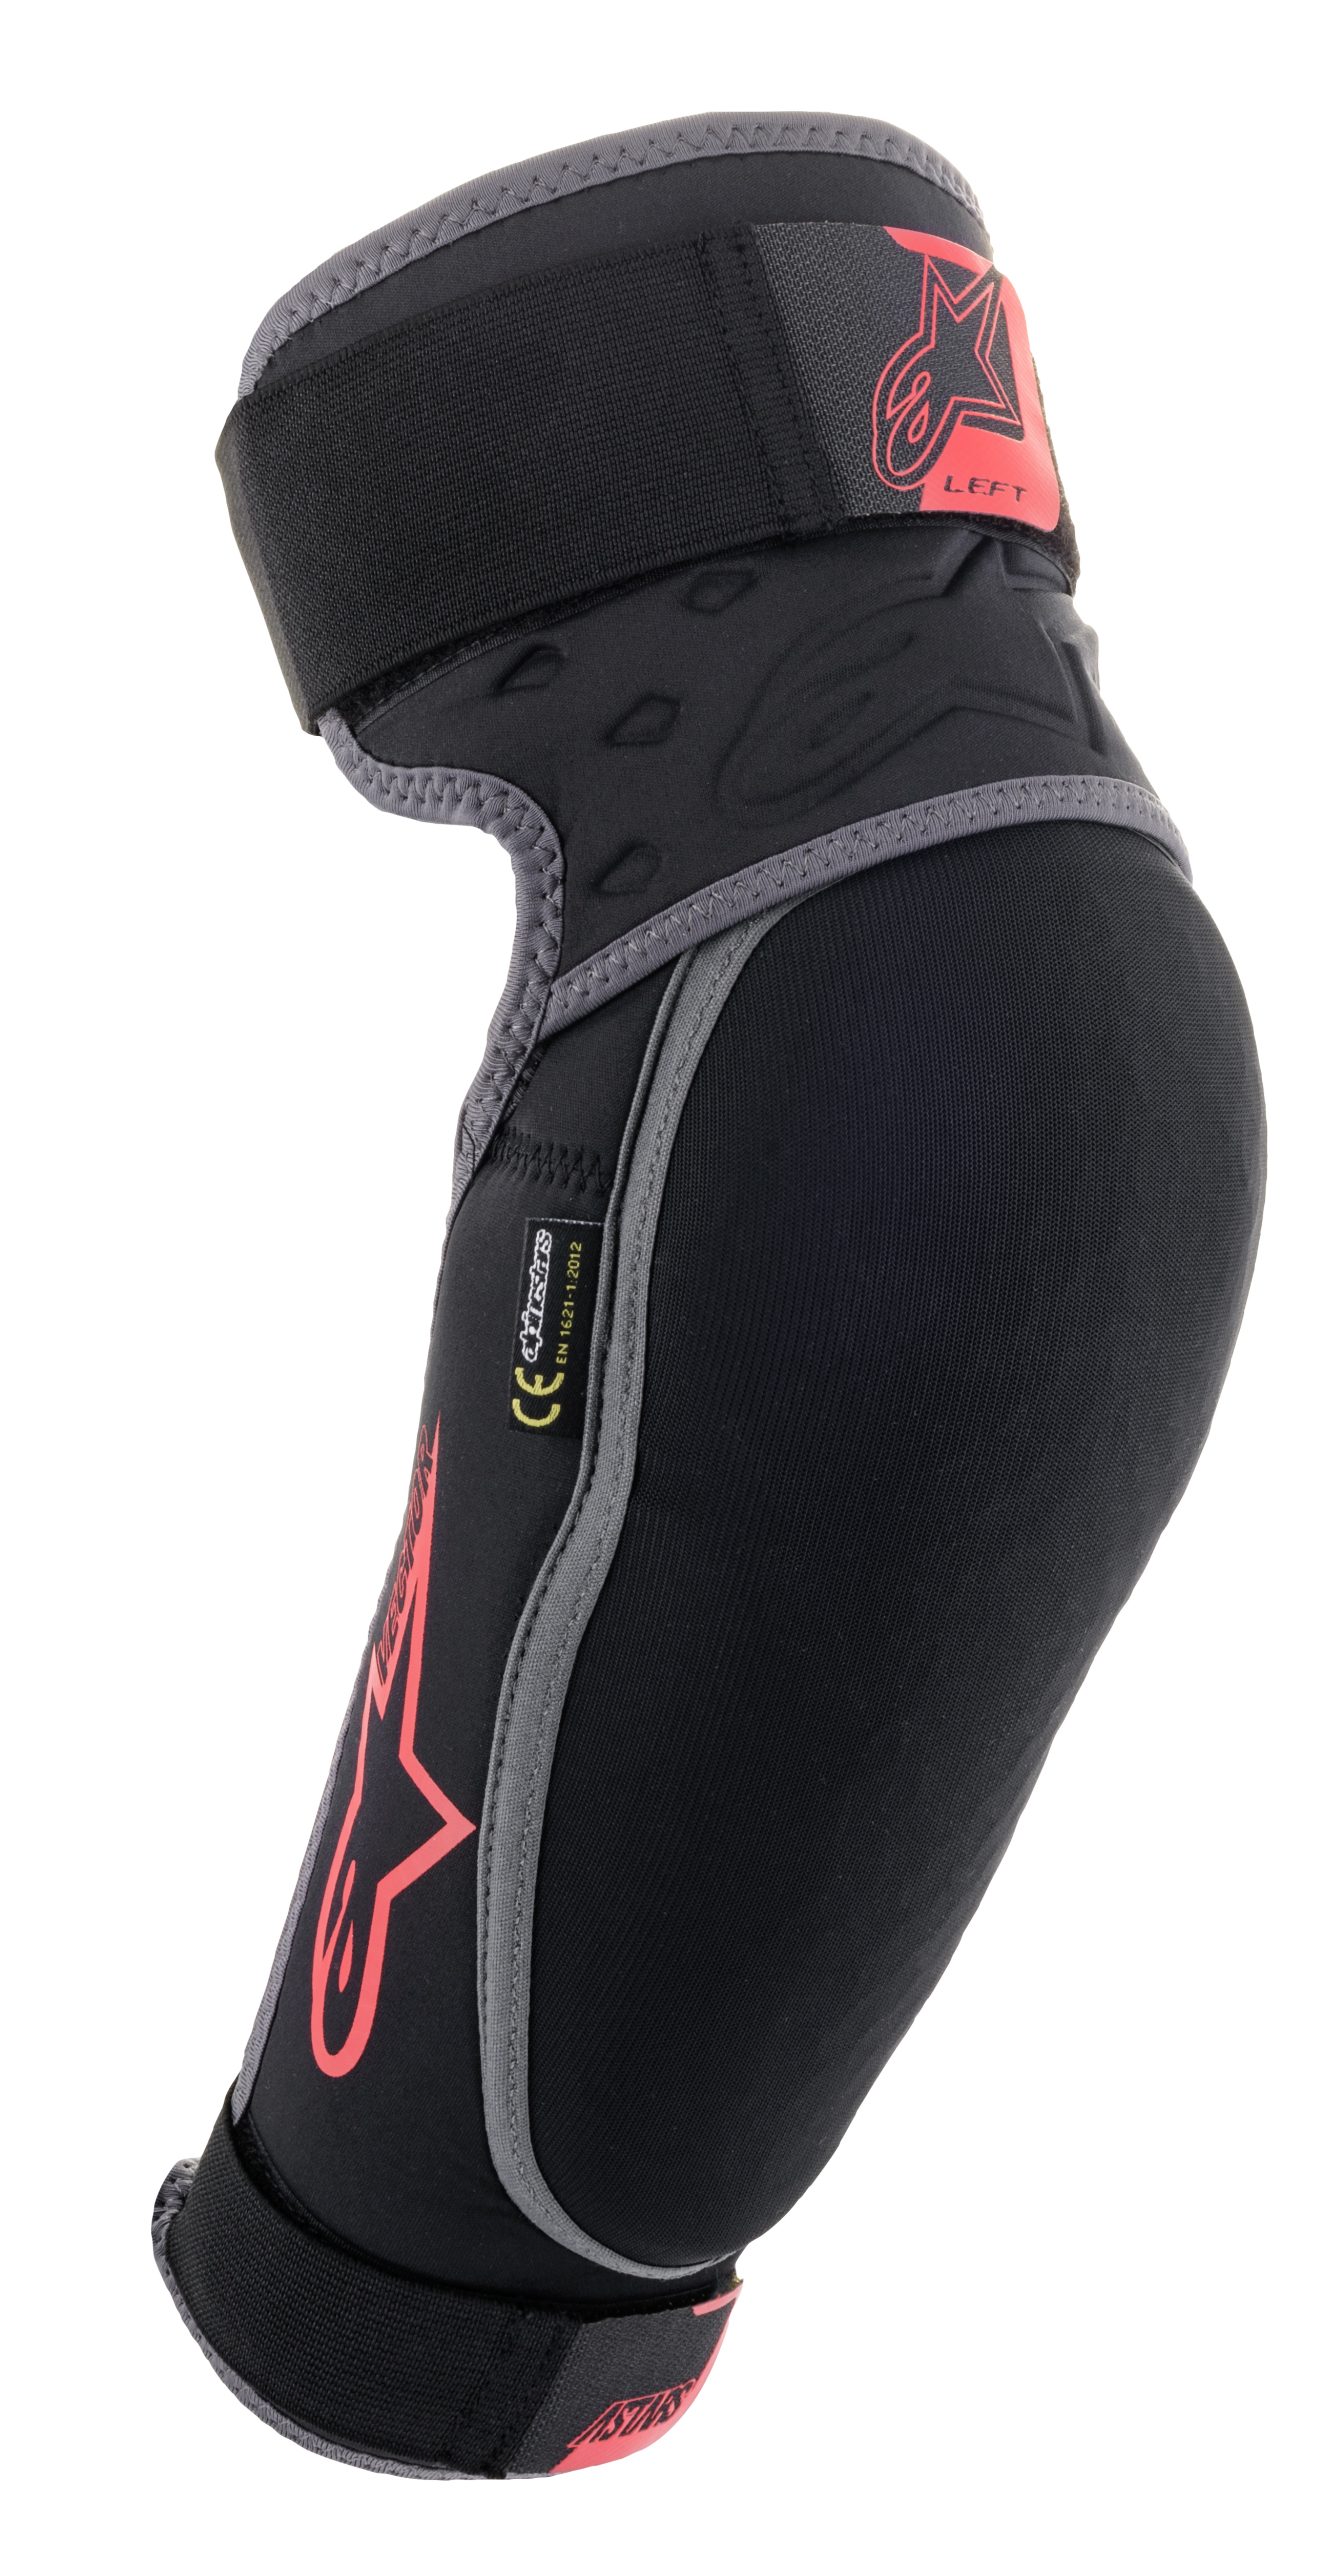 ALPINESTARS VECTOR ELBOW PROTECTOR BLACK ANTHRACITE RED SIZE S/M